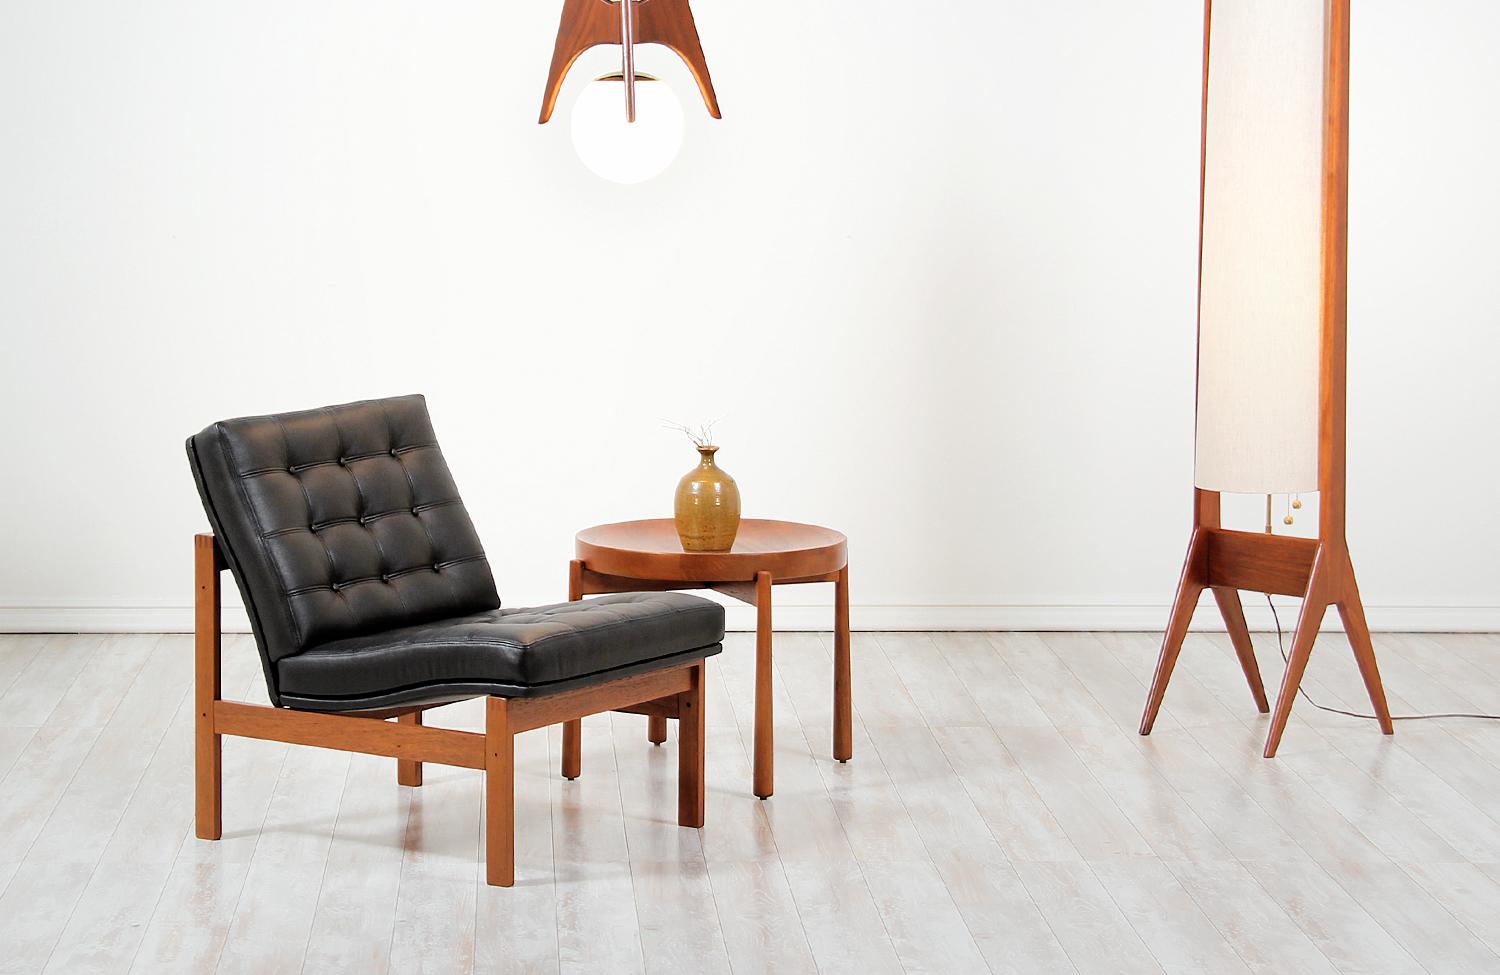 Stylish ‘Moduline’ lounge chair designed by Ole Gjerløv-Knudsen and Torben Lind for France & Søn in Denmark in 1962. This gorgeous example of modern Danish design features a sturdy teak wood frame with an angled seat newly upholstered in black